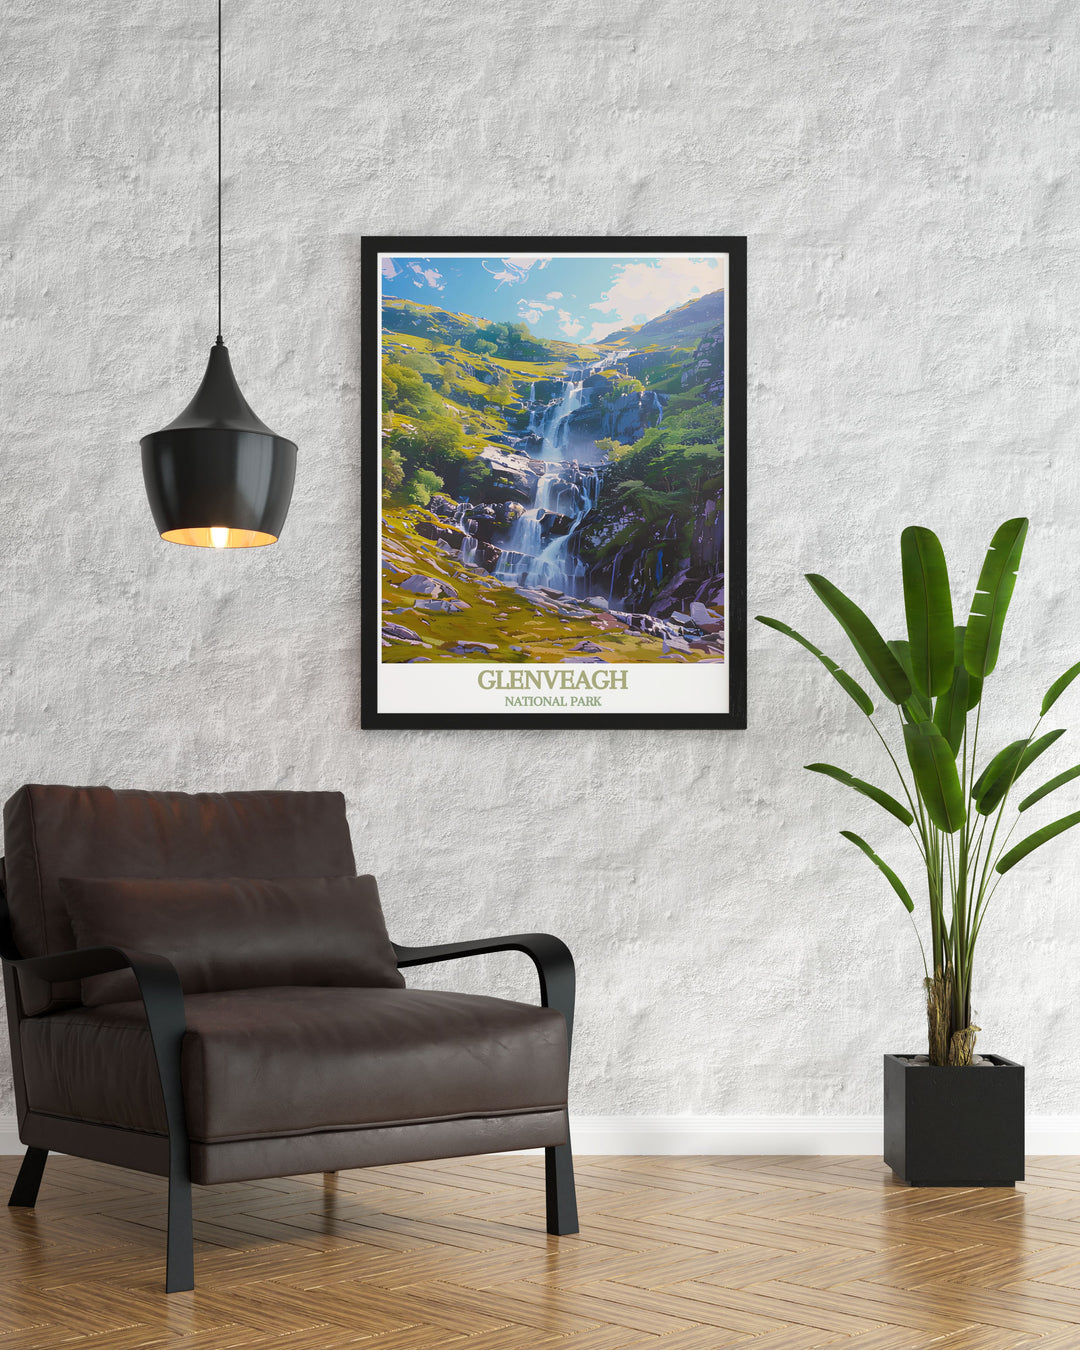 Gallery wall art of Glenveagh National Park, emphasizing the lush greenery and stunning landscapes of this Irish gem, perfect for enhancing your home with a touch of natural charm.